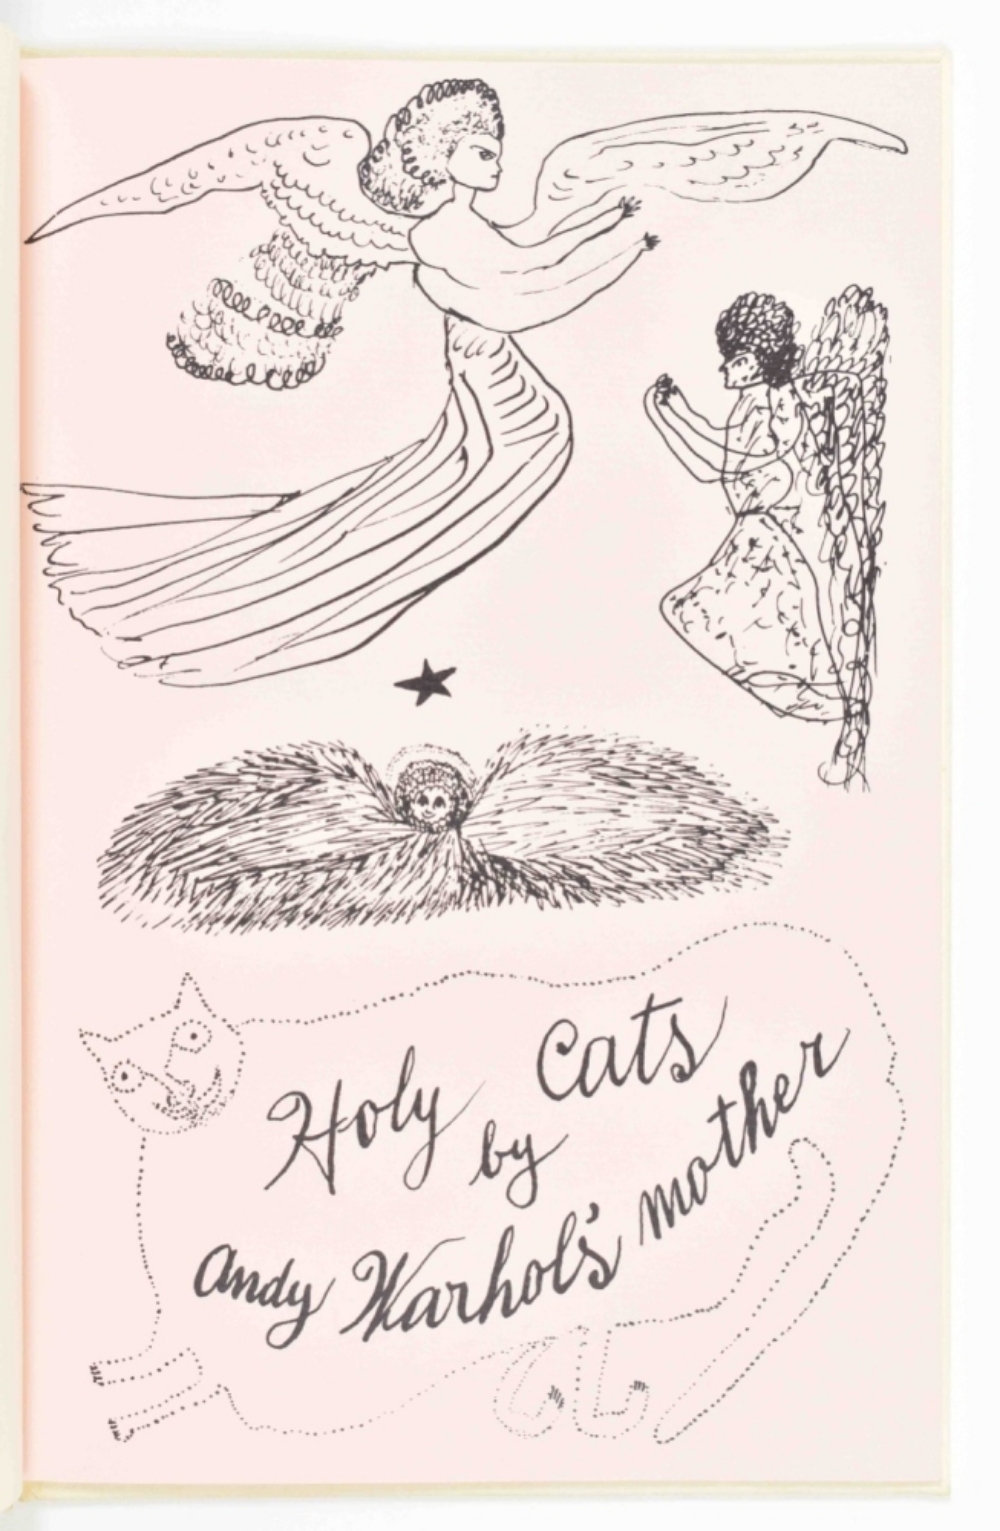 Andy Warhol, 25 Cats Name Sam and One Blue Pussy & Holy Cats by Andy Warhol's Mother - Image 7 of 10